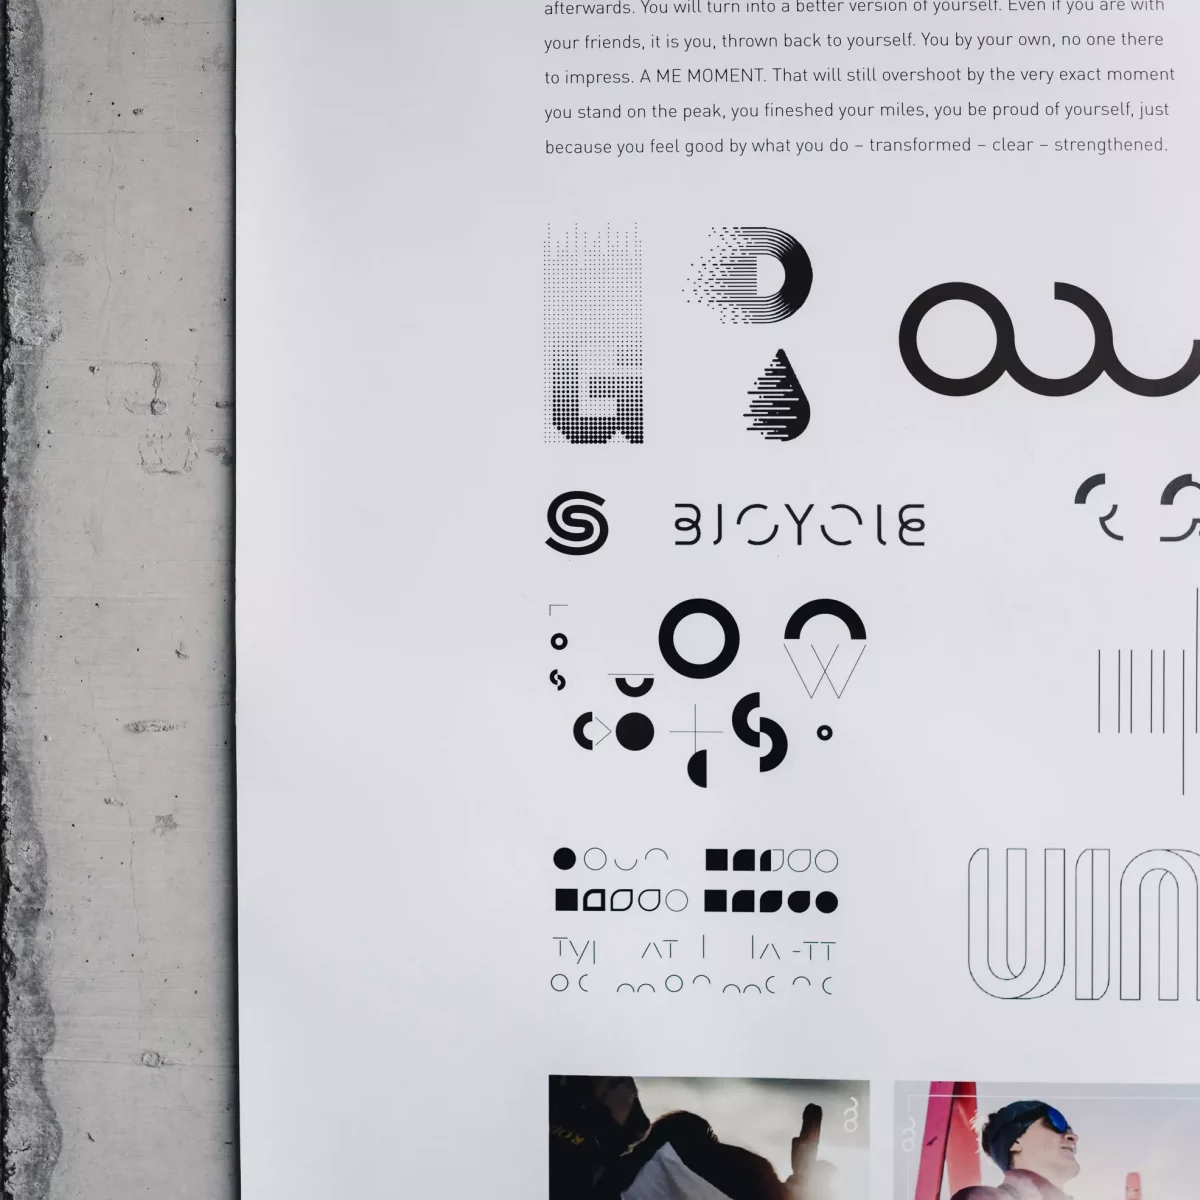 UYN brand communication design and corporate identity concept